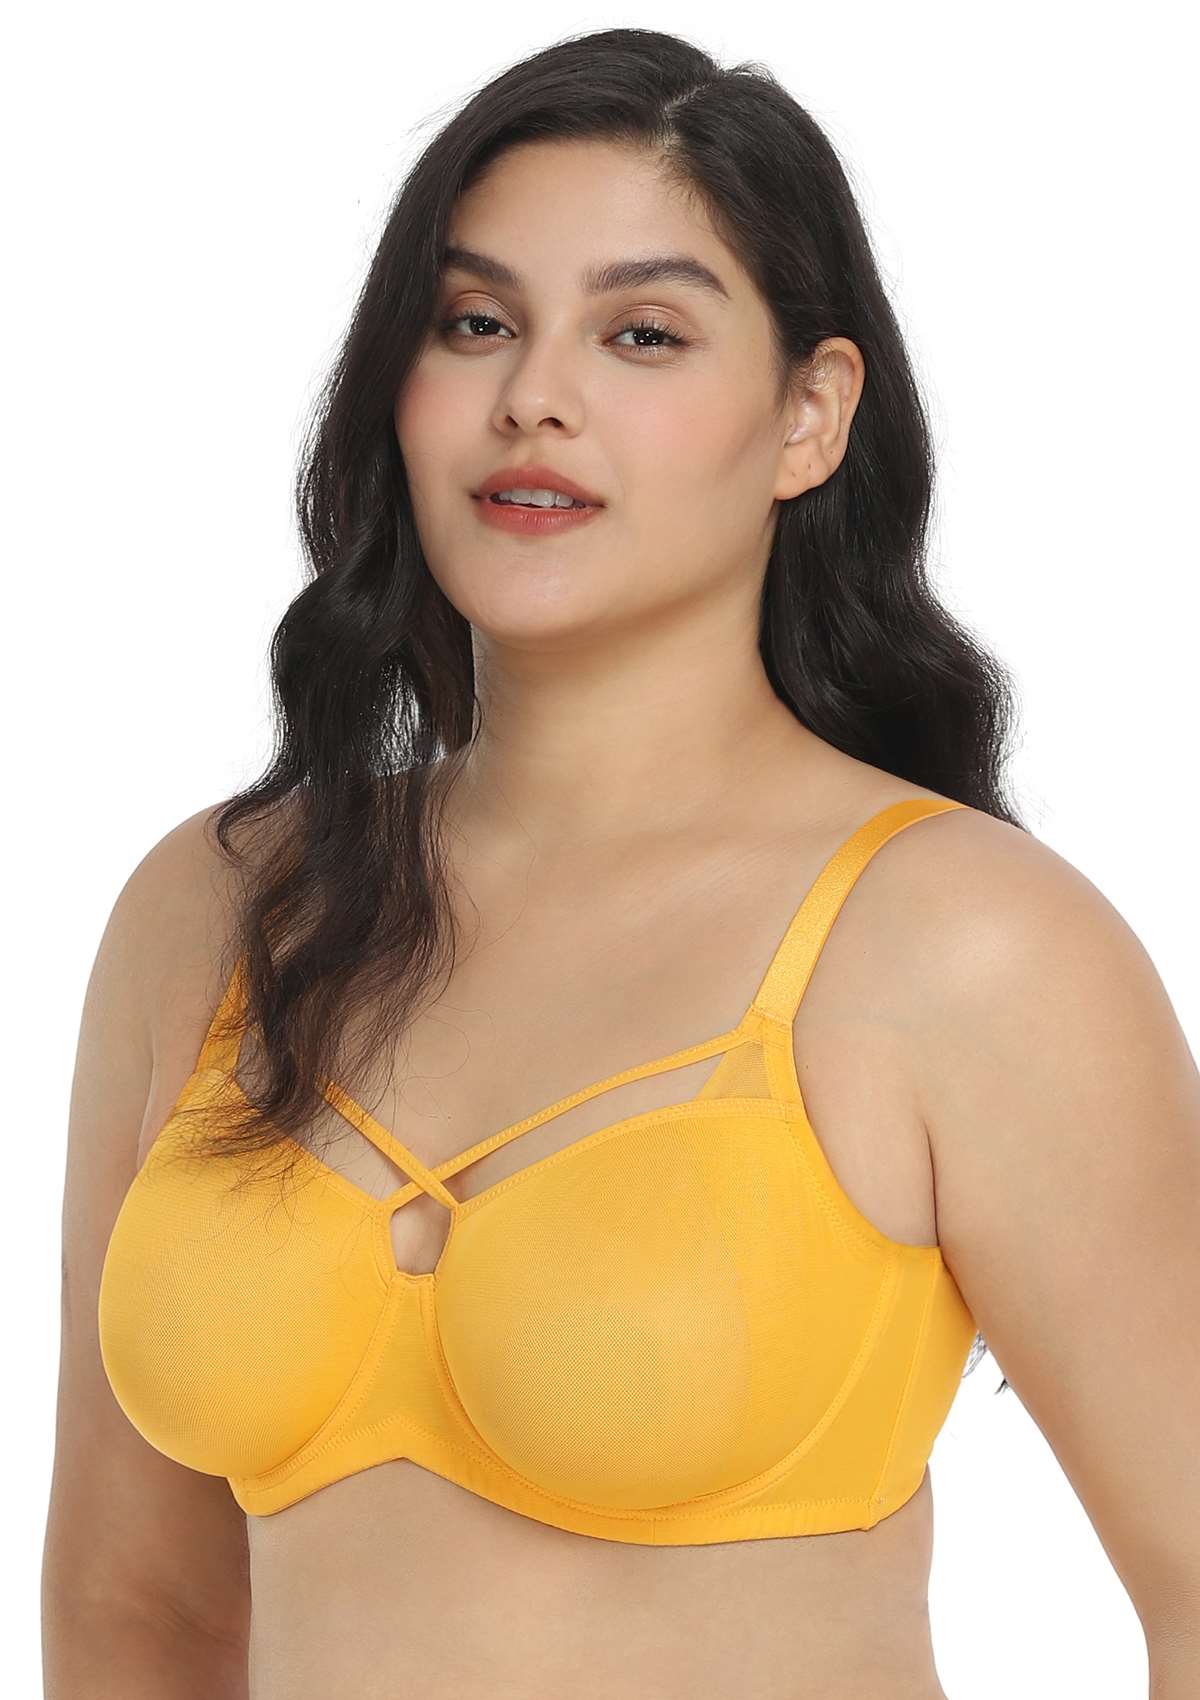 HSIA Billie Cross Front Strap Smooth Sheer Mesh Comfy Underwire Bra - Yellow / 34 / C